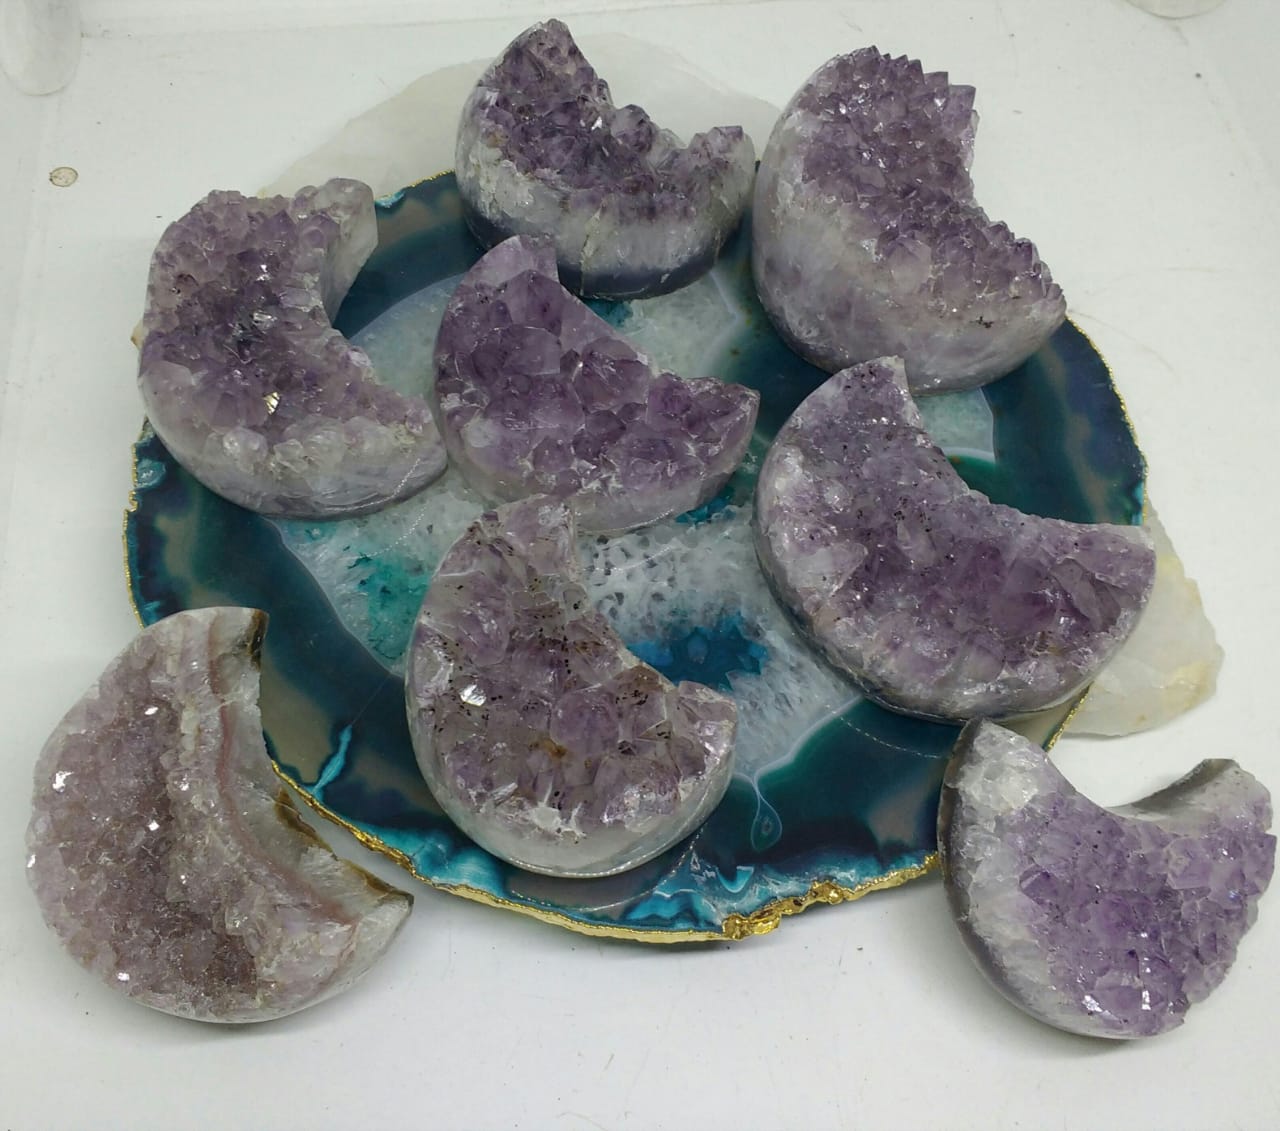 Stones from Uruguay - Polished Amethyst Druzy Half Moon for Decoration, Meditation, Spiritual Work - Polished Amethyst Cluster Moon  Crescent  for Reiki Grids, Decoration and Concentration.